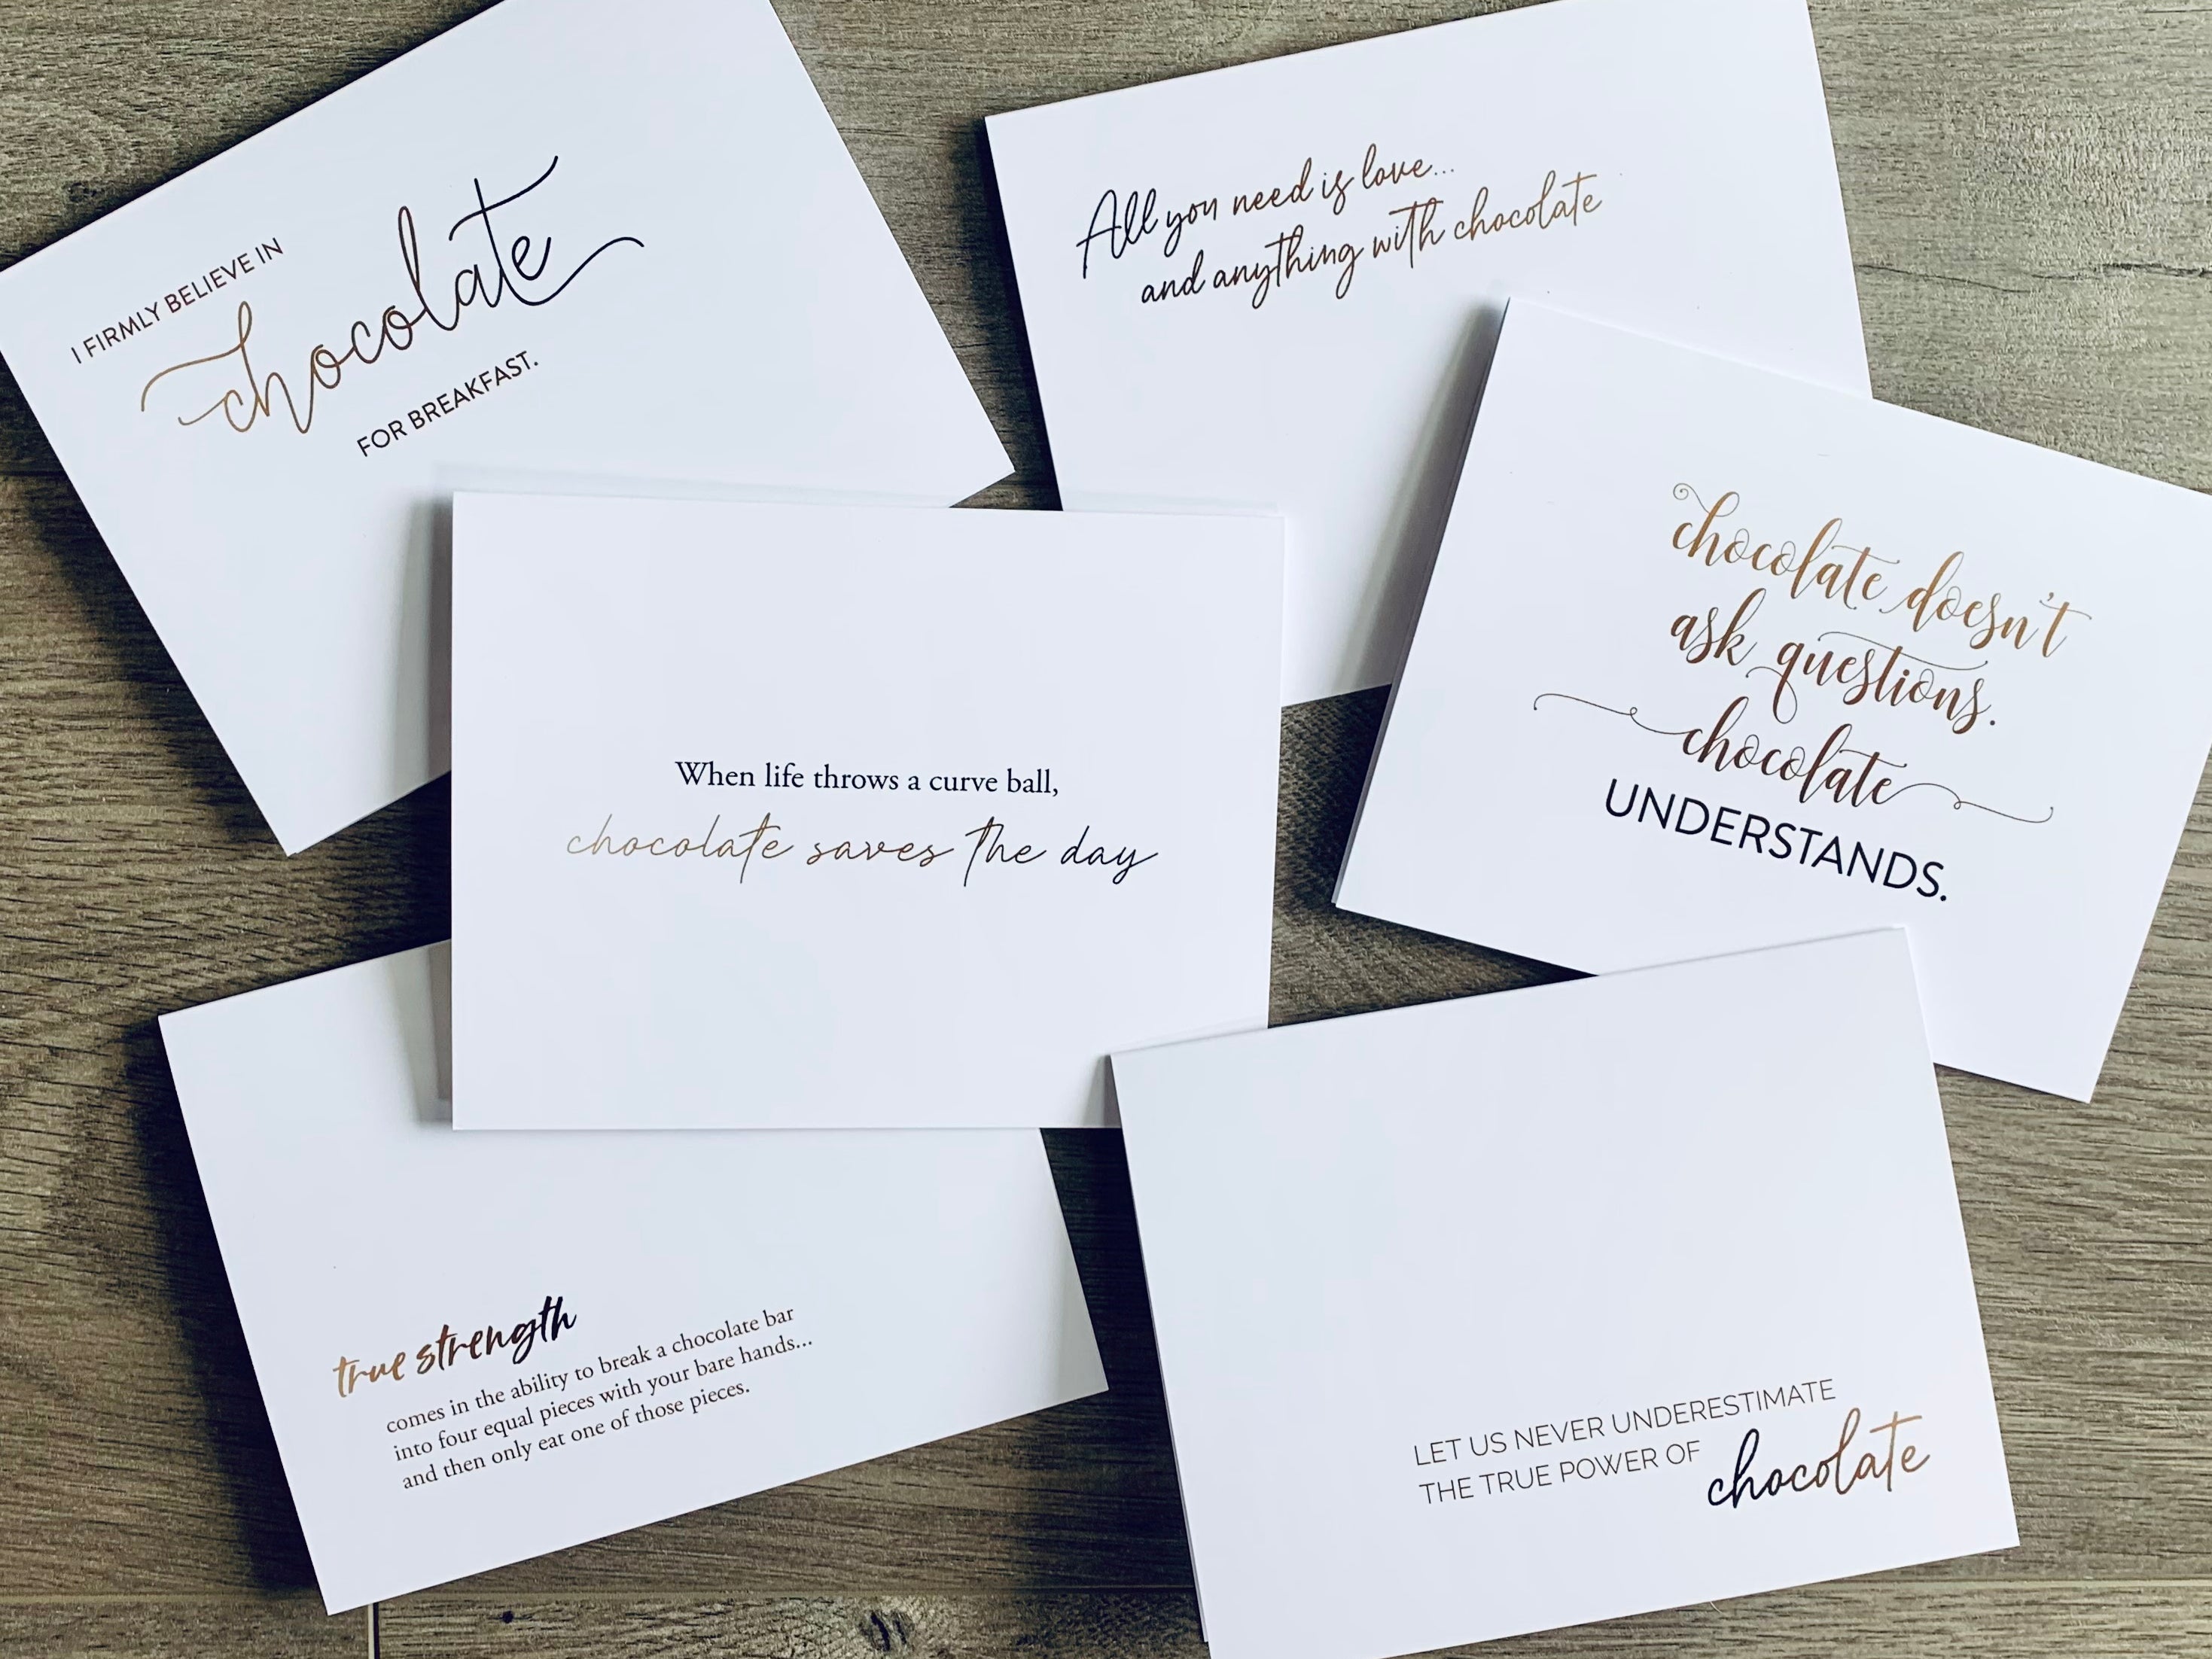 Six white notecards are lying on a wooden floor, overlapping one another. Each card has a chocolate-themed saying on the front in ranging brown tones. Chocolate Lovers Collection by Stationare.